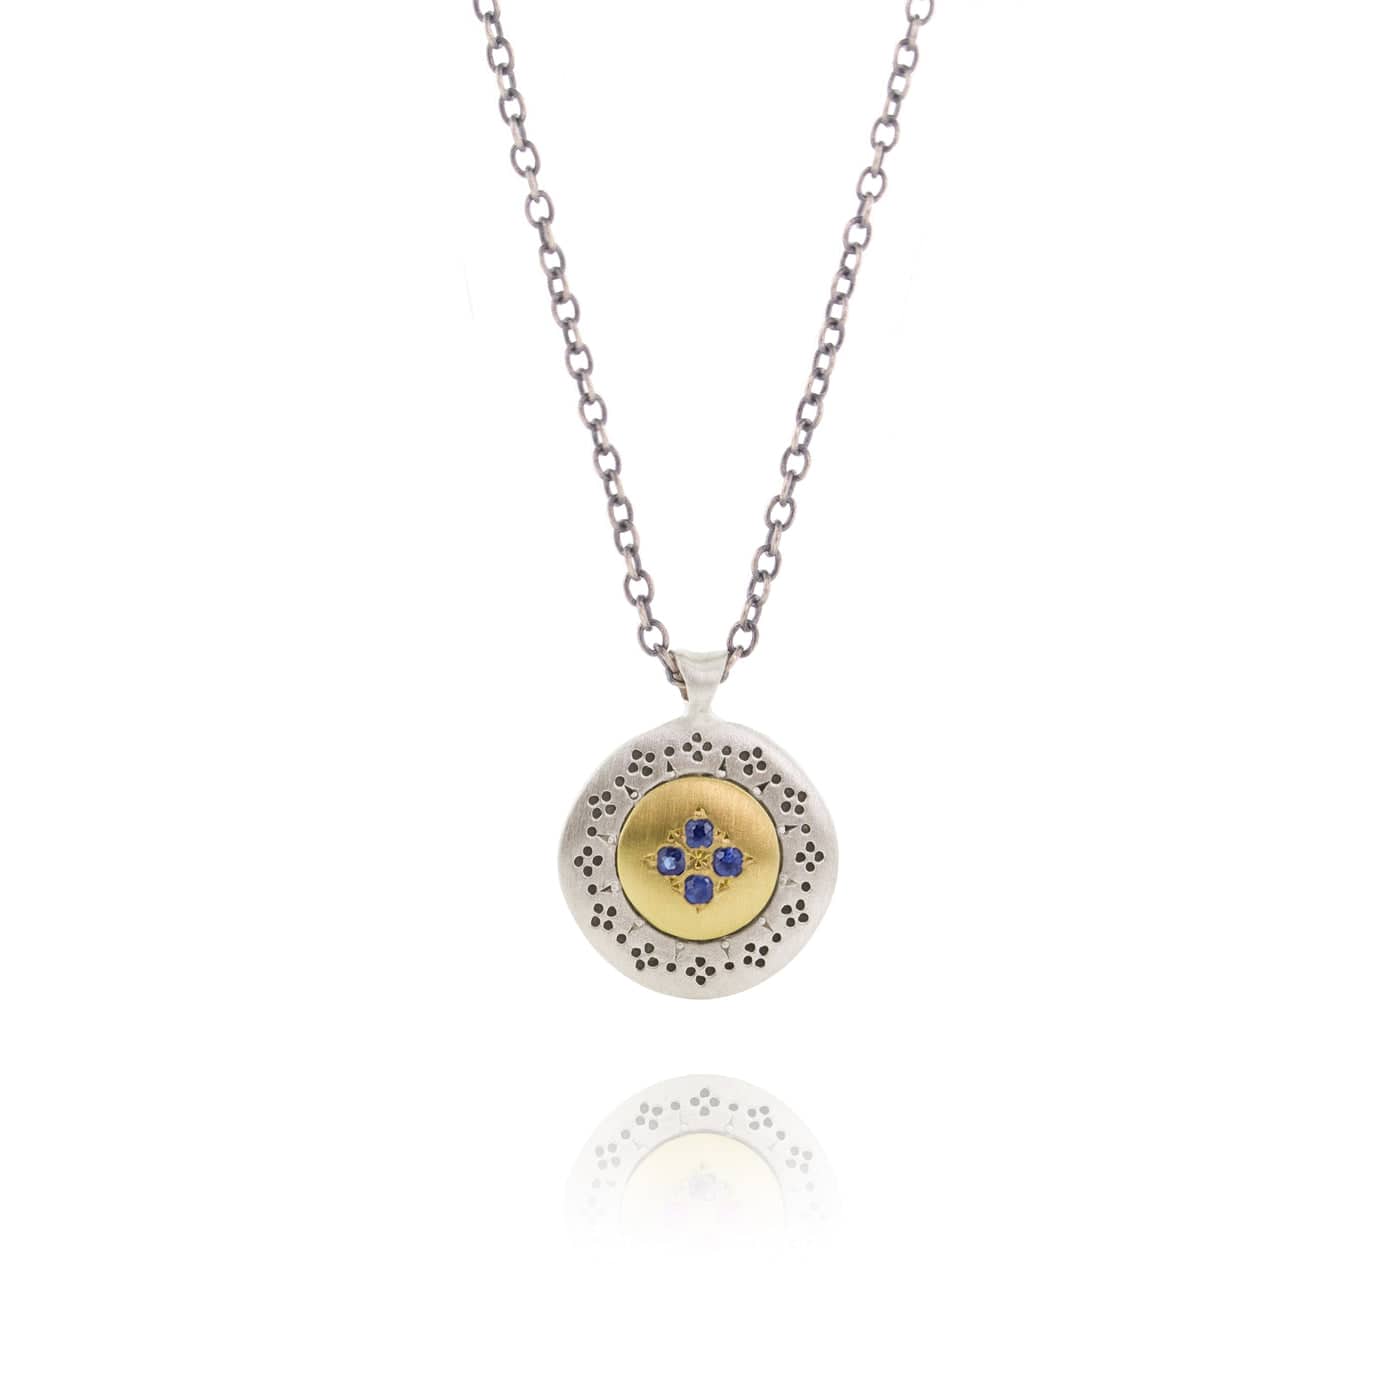 NKL-18K Four Star Harmony Pendant with Sapphire